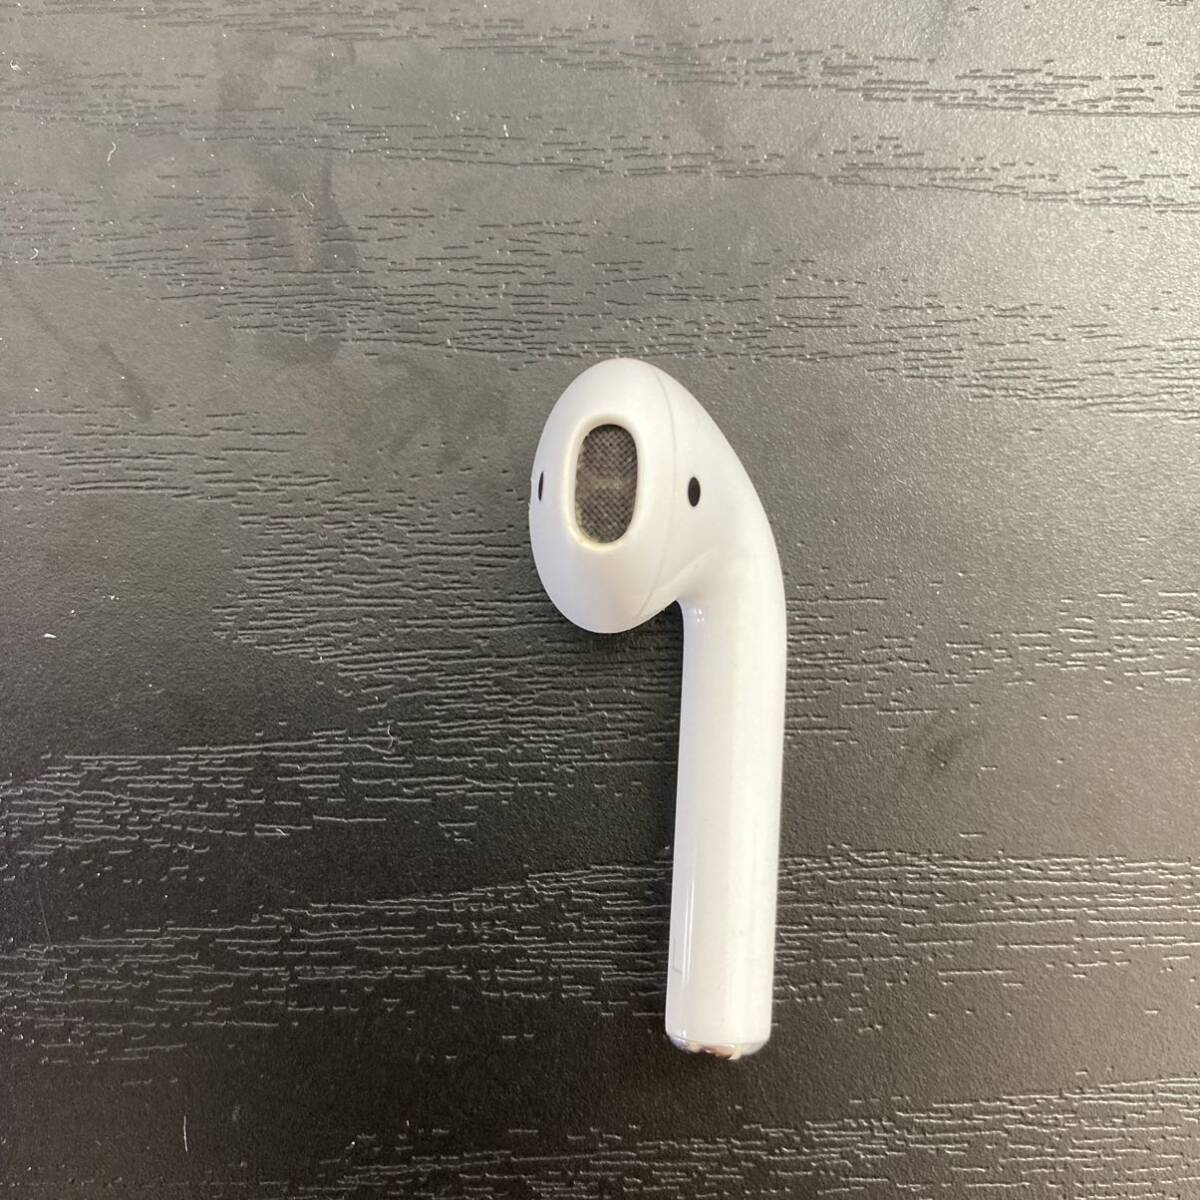 AirPods エアポッズ 第2世代 A2031 左耳のみ P-3_画像2